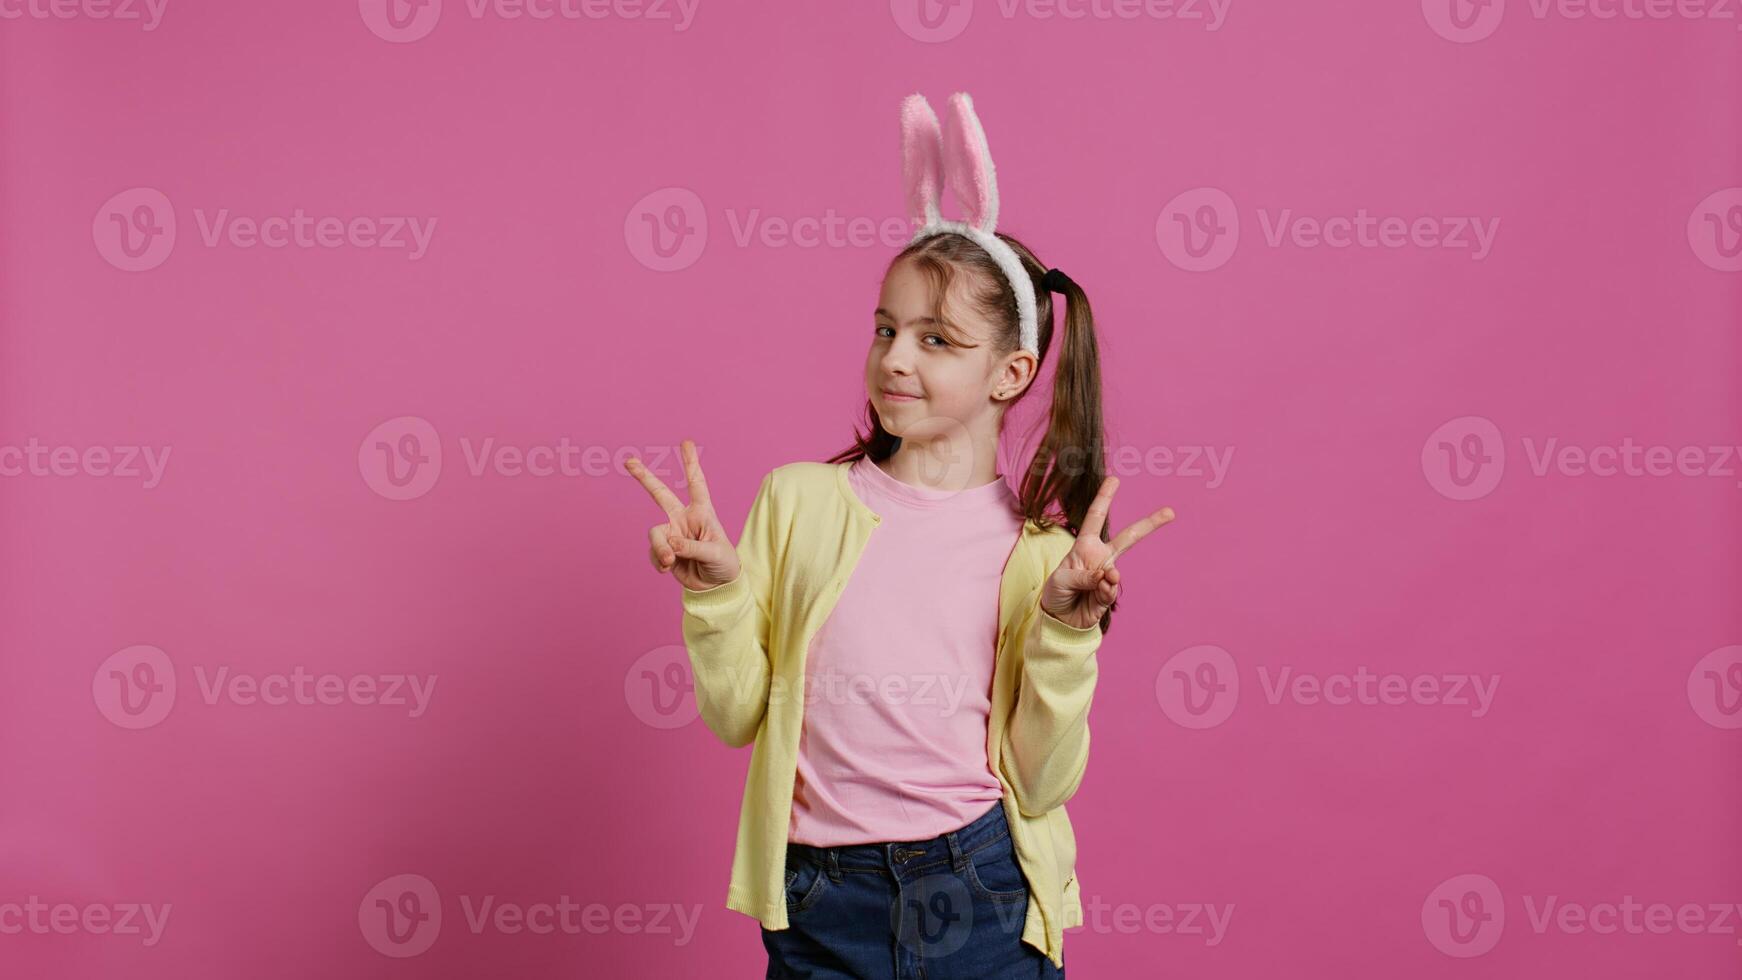 Young cheerful kid with pigtails showing peace sign in studio, feeling excited and confident about easter sunday celebration. Smiling youngster does signs against background. Camera B. photo